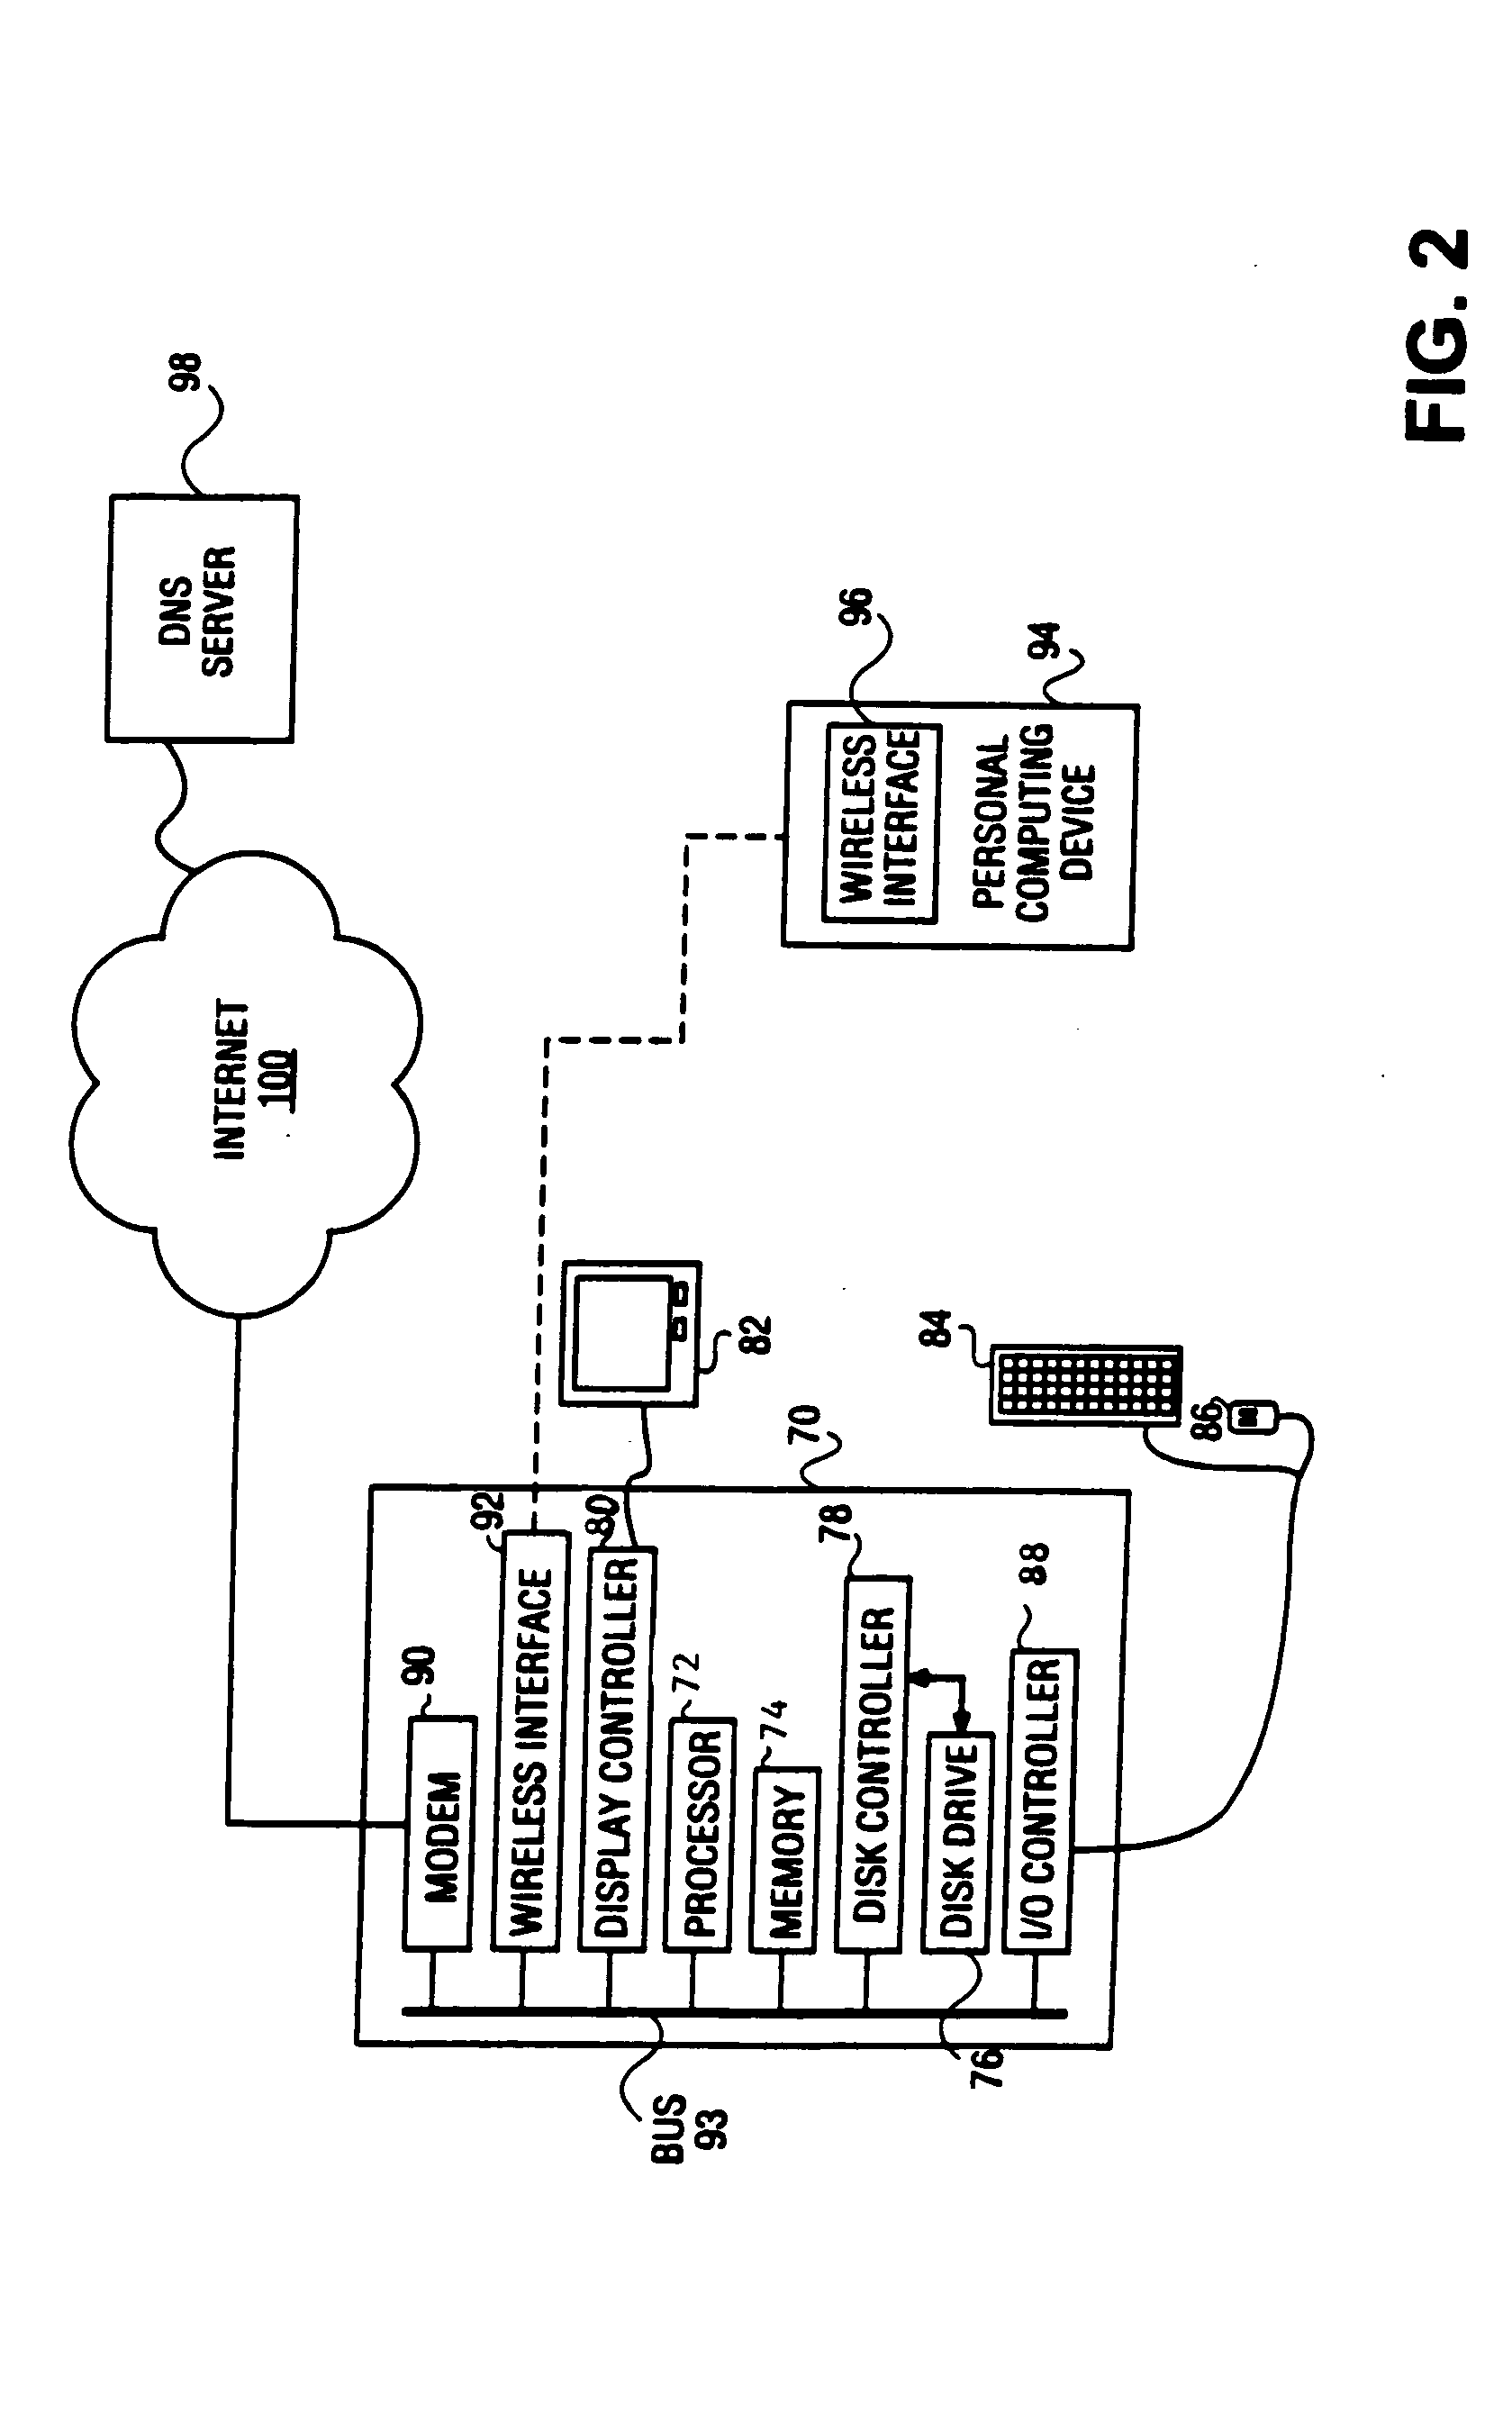 Method and system for preventing a timeout from reaching a network host